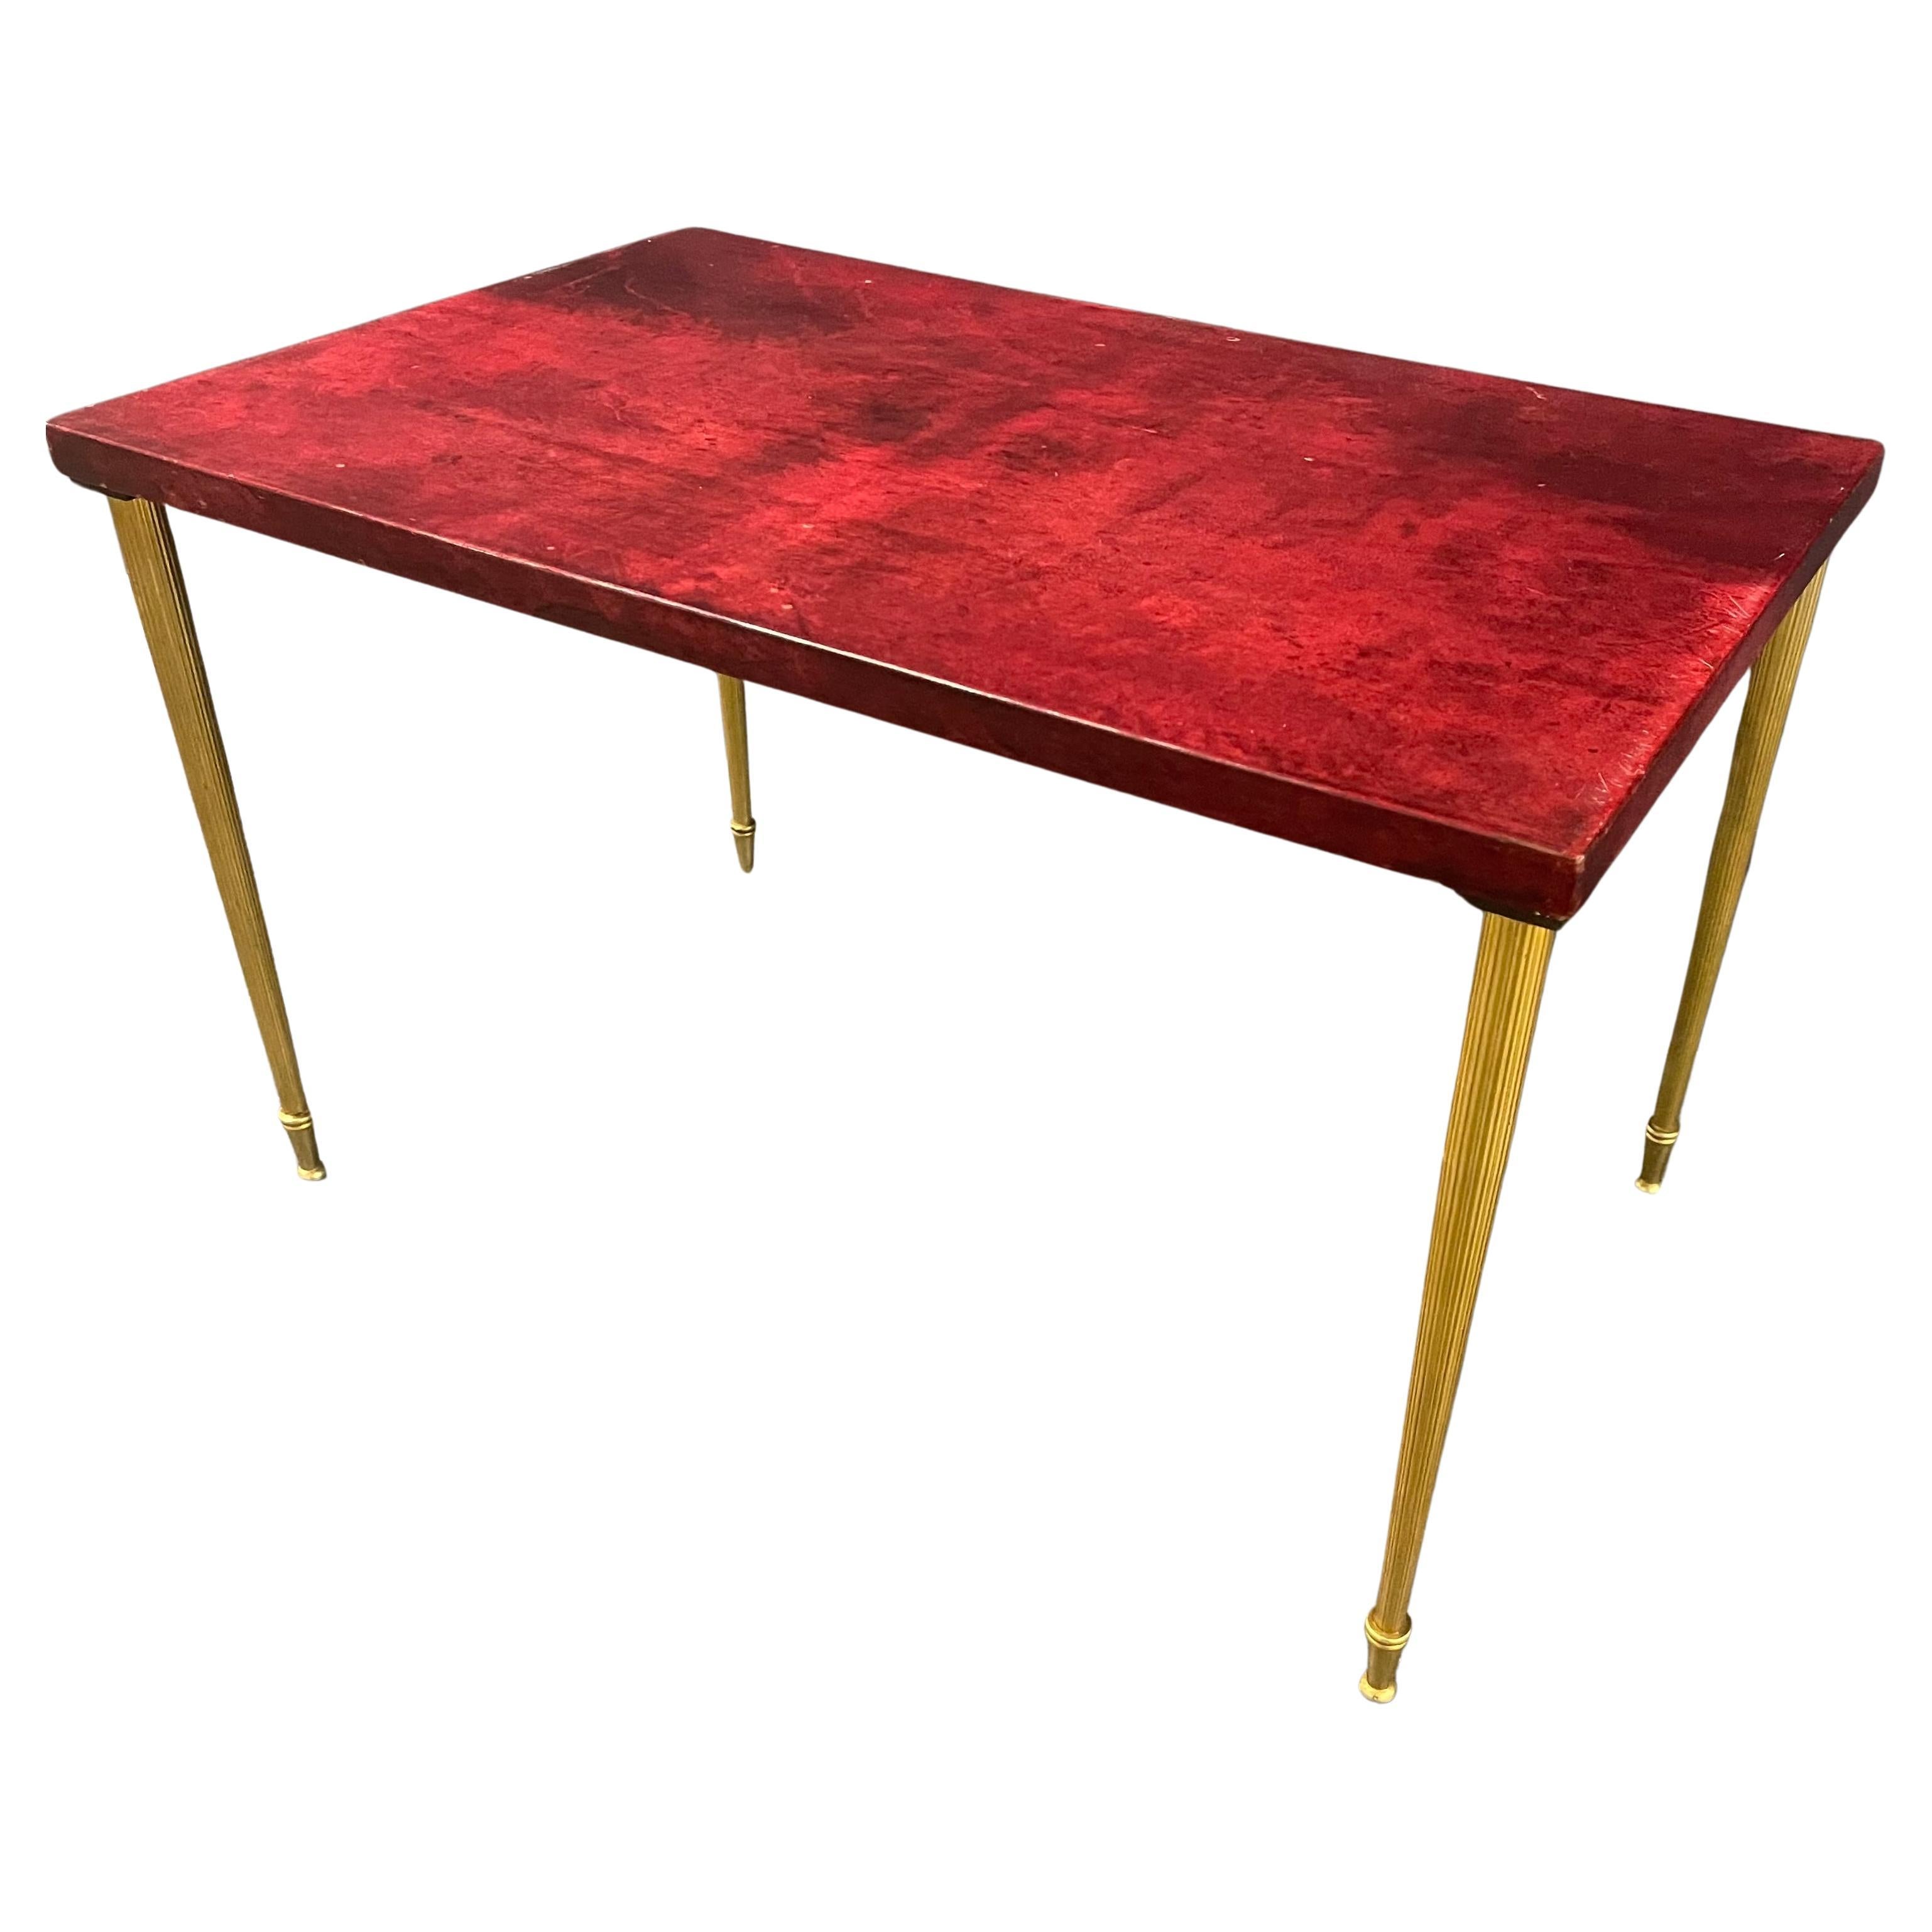 nice aldo tura side table - great color For Sale